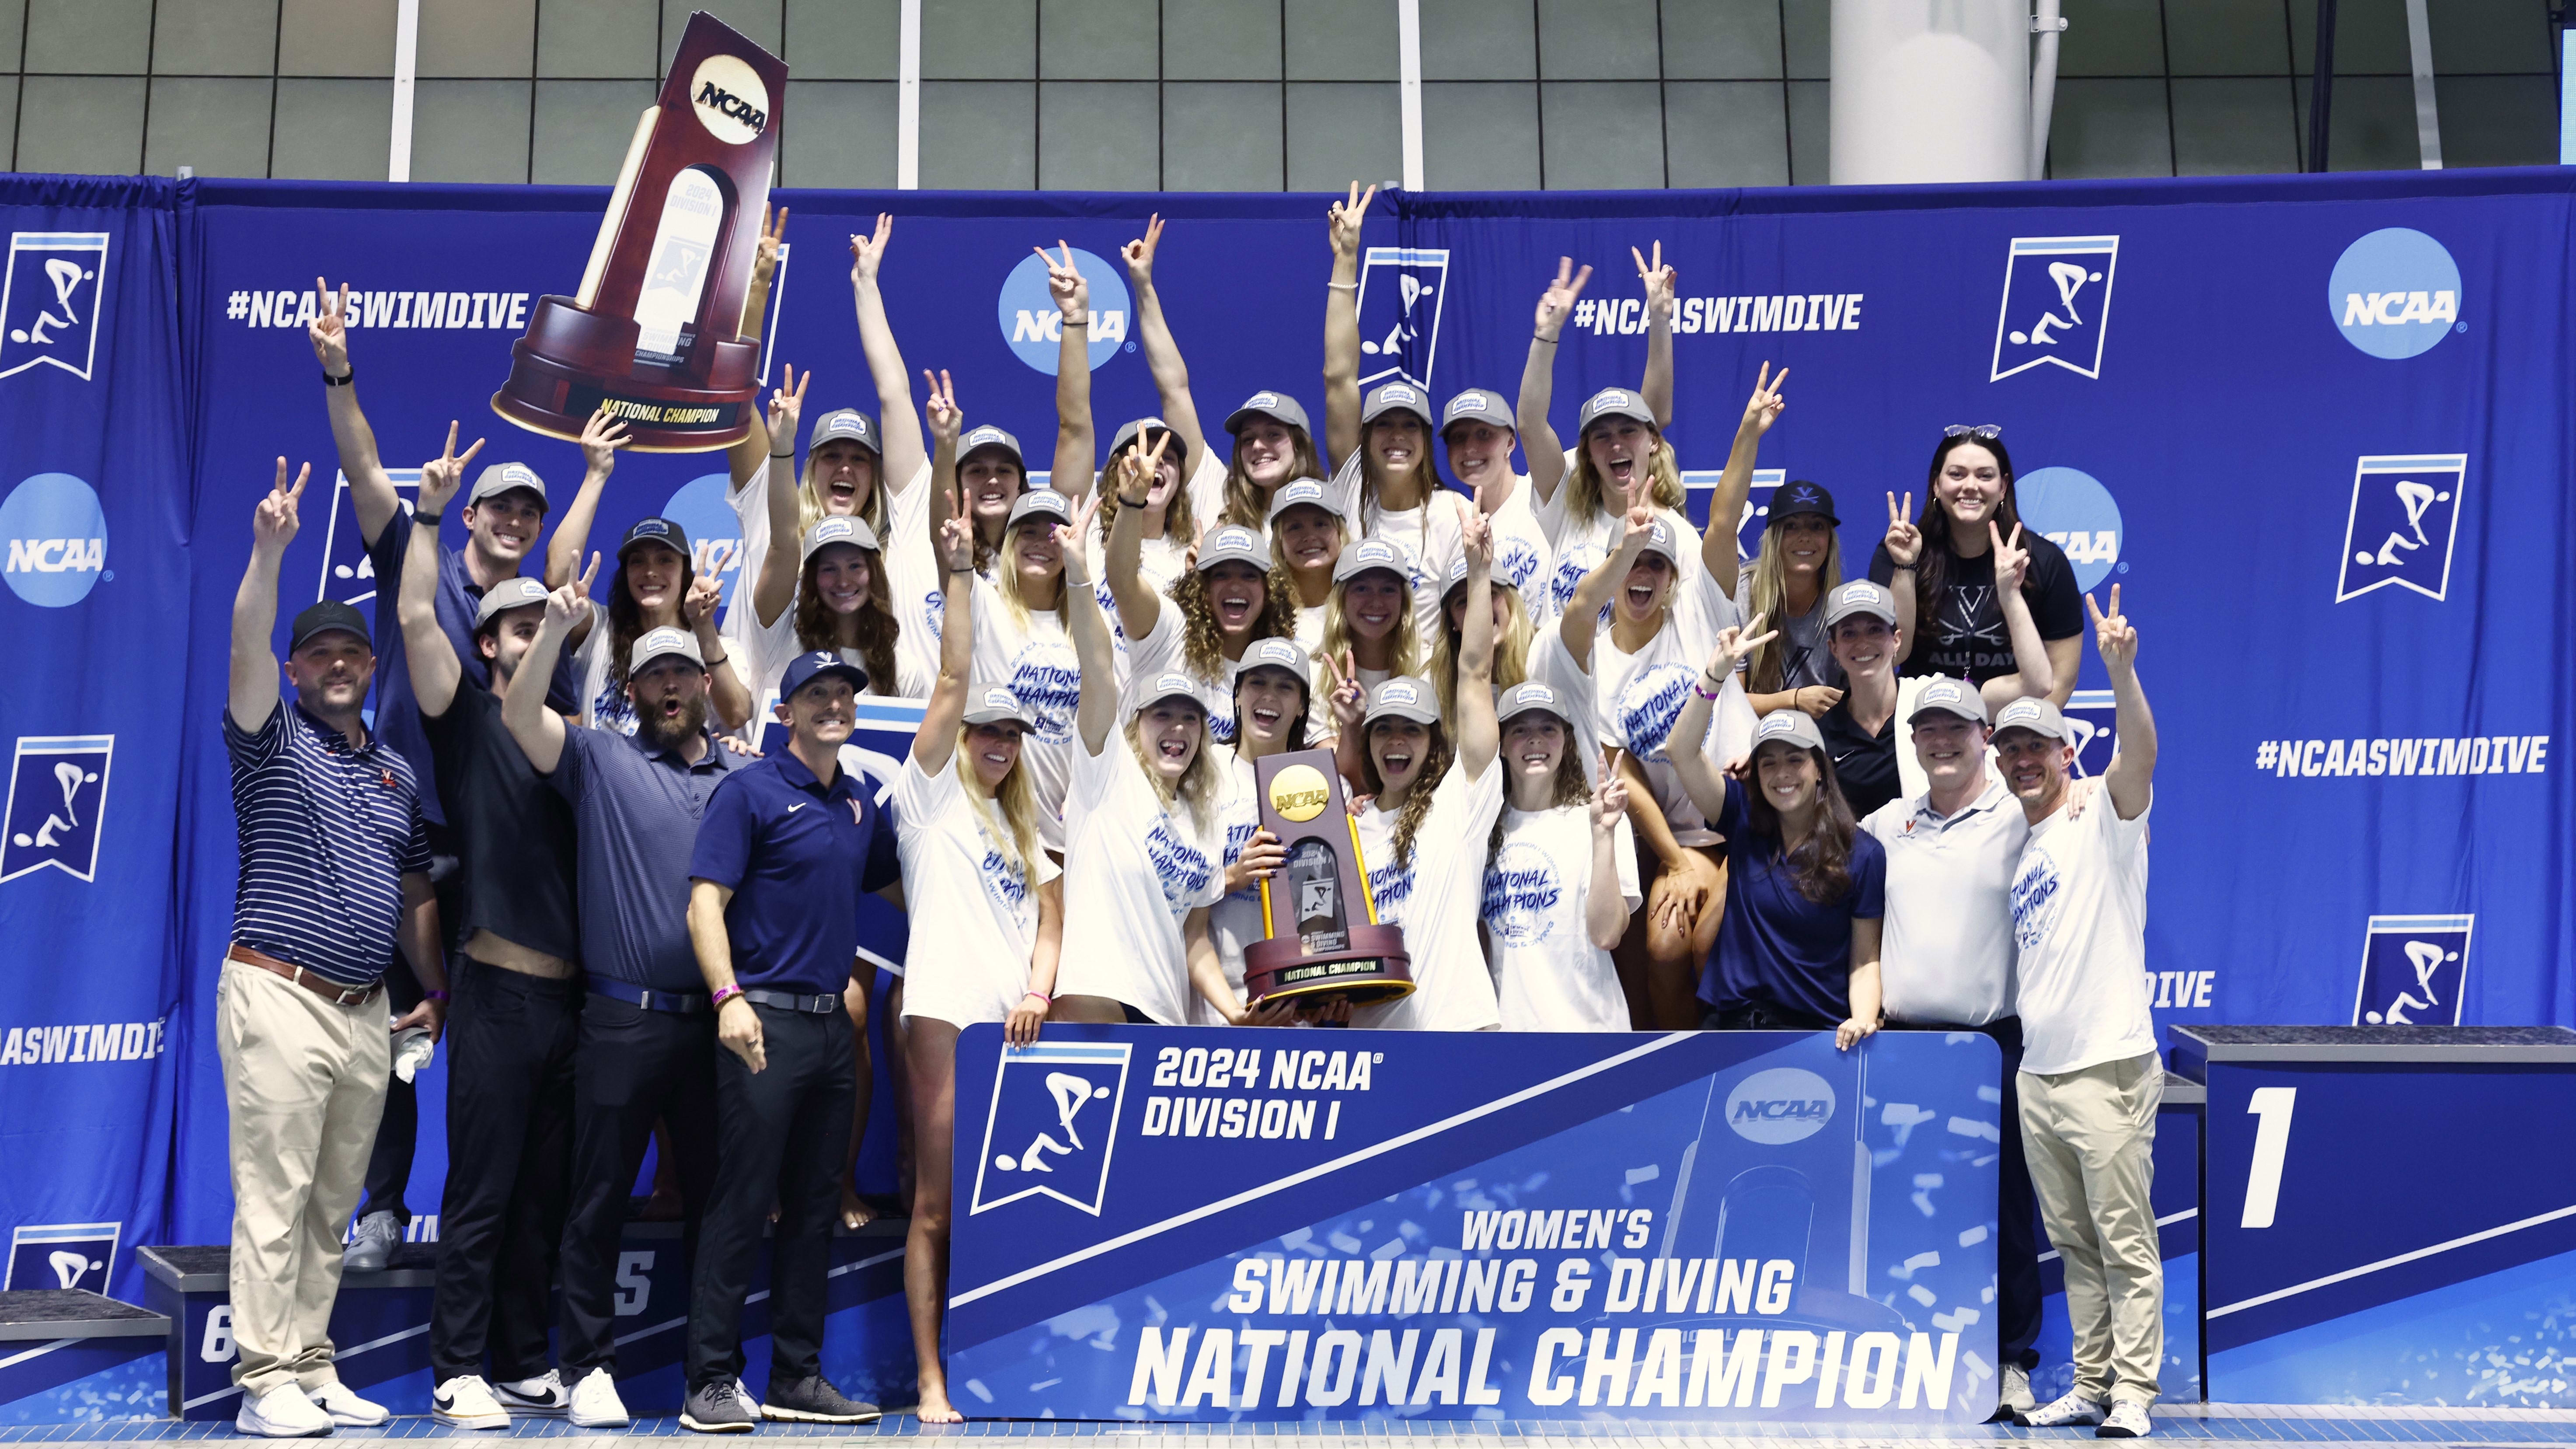 Virginia celebrates winning the 2024 NCAA Division I Women's Swimming & Diving National Championship in Athens, Georgia.